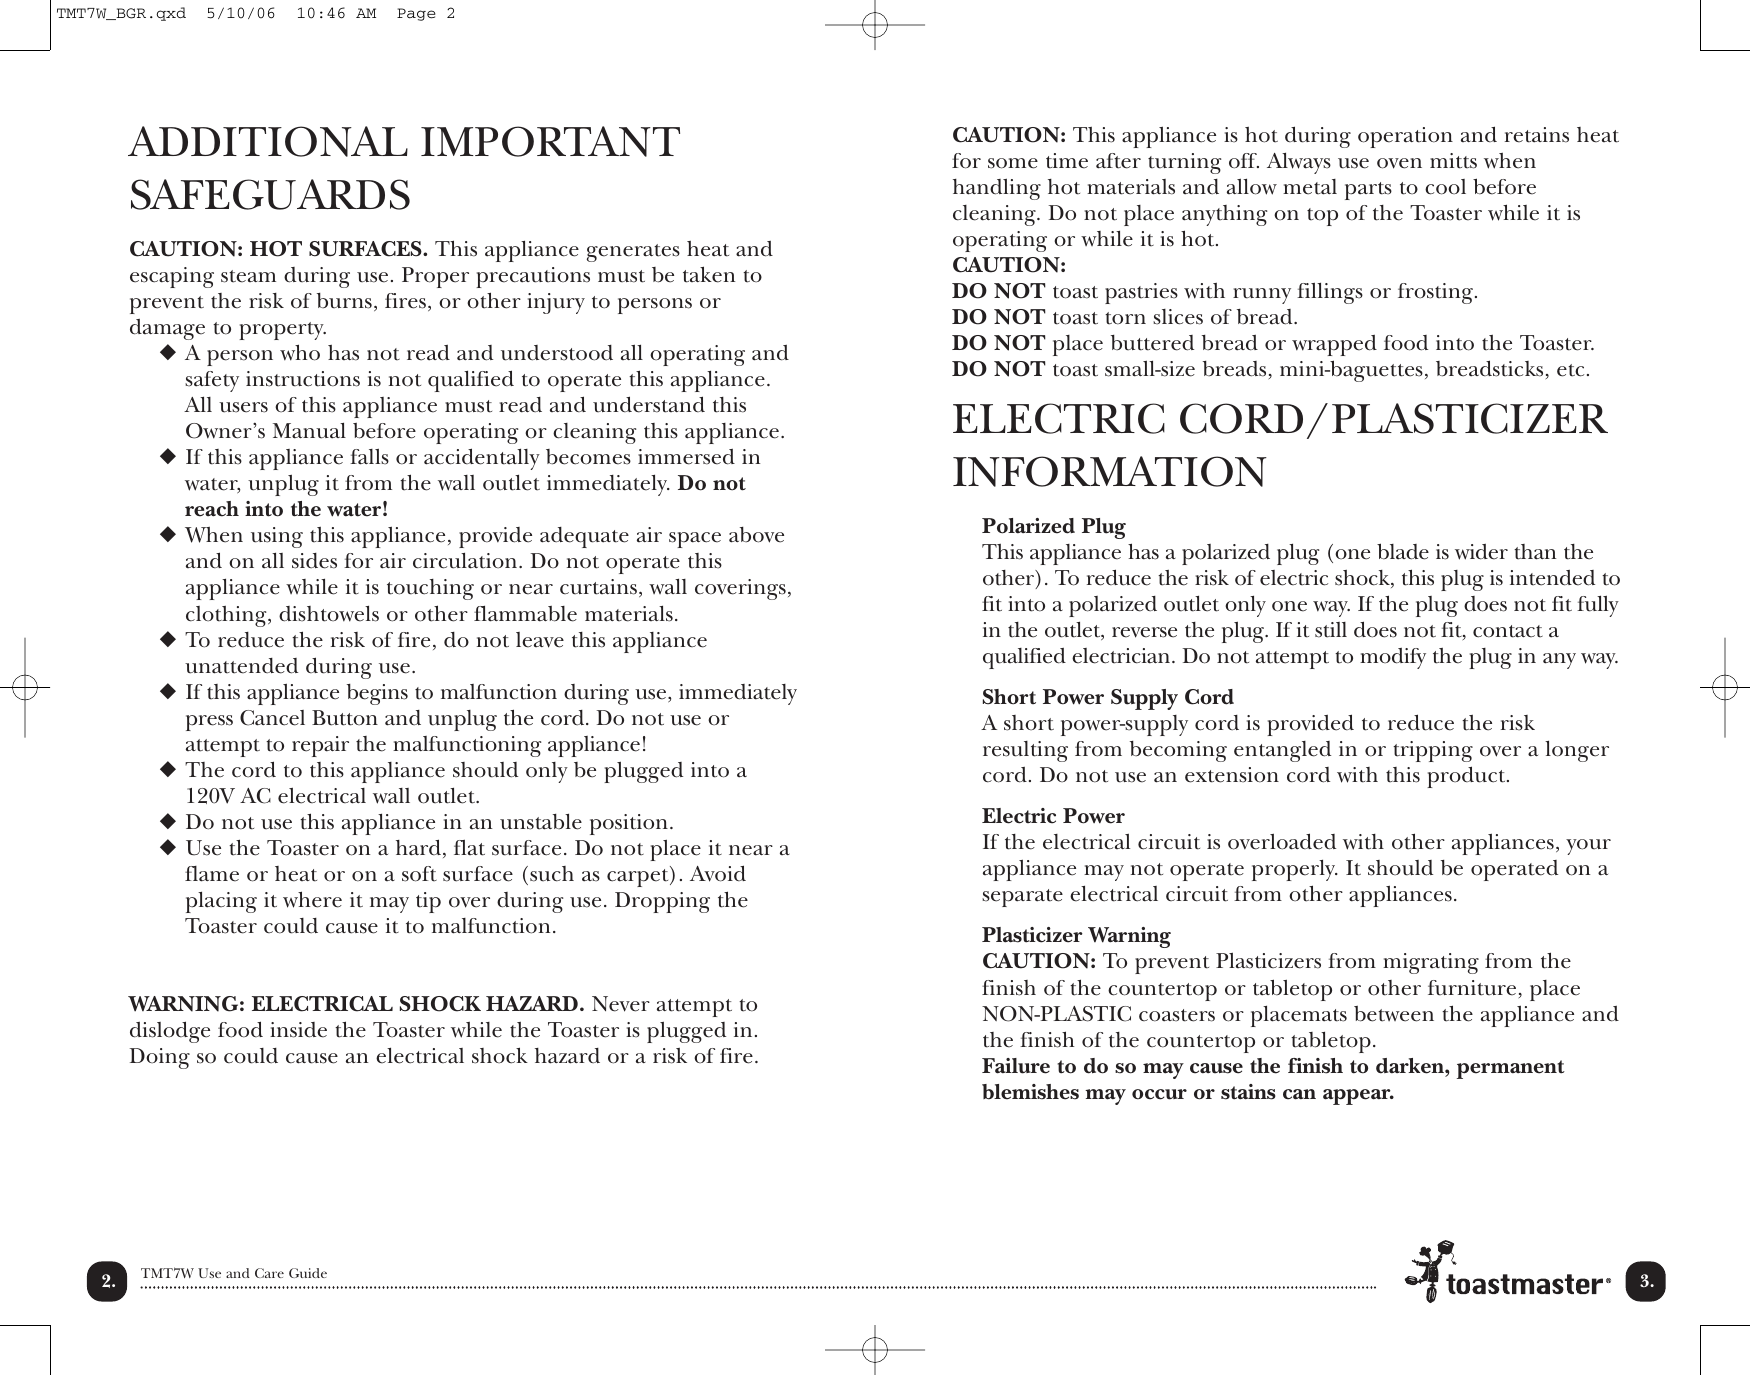 Page 4 of 12 - Toastmaster Toastmaster-Tmt7W-Users-Manual- T2050 Manual  Toastmaster-tmt7w-users-manual